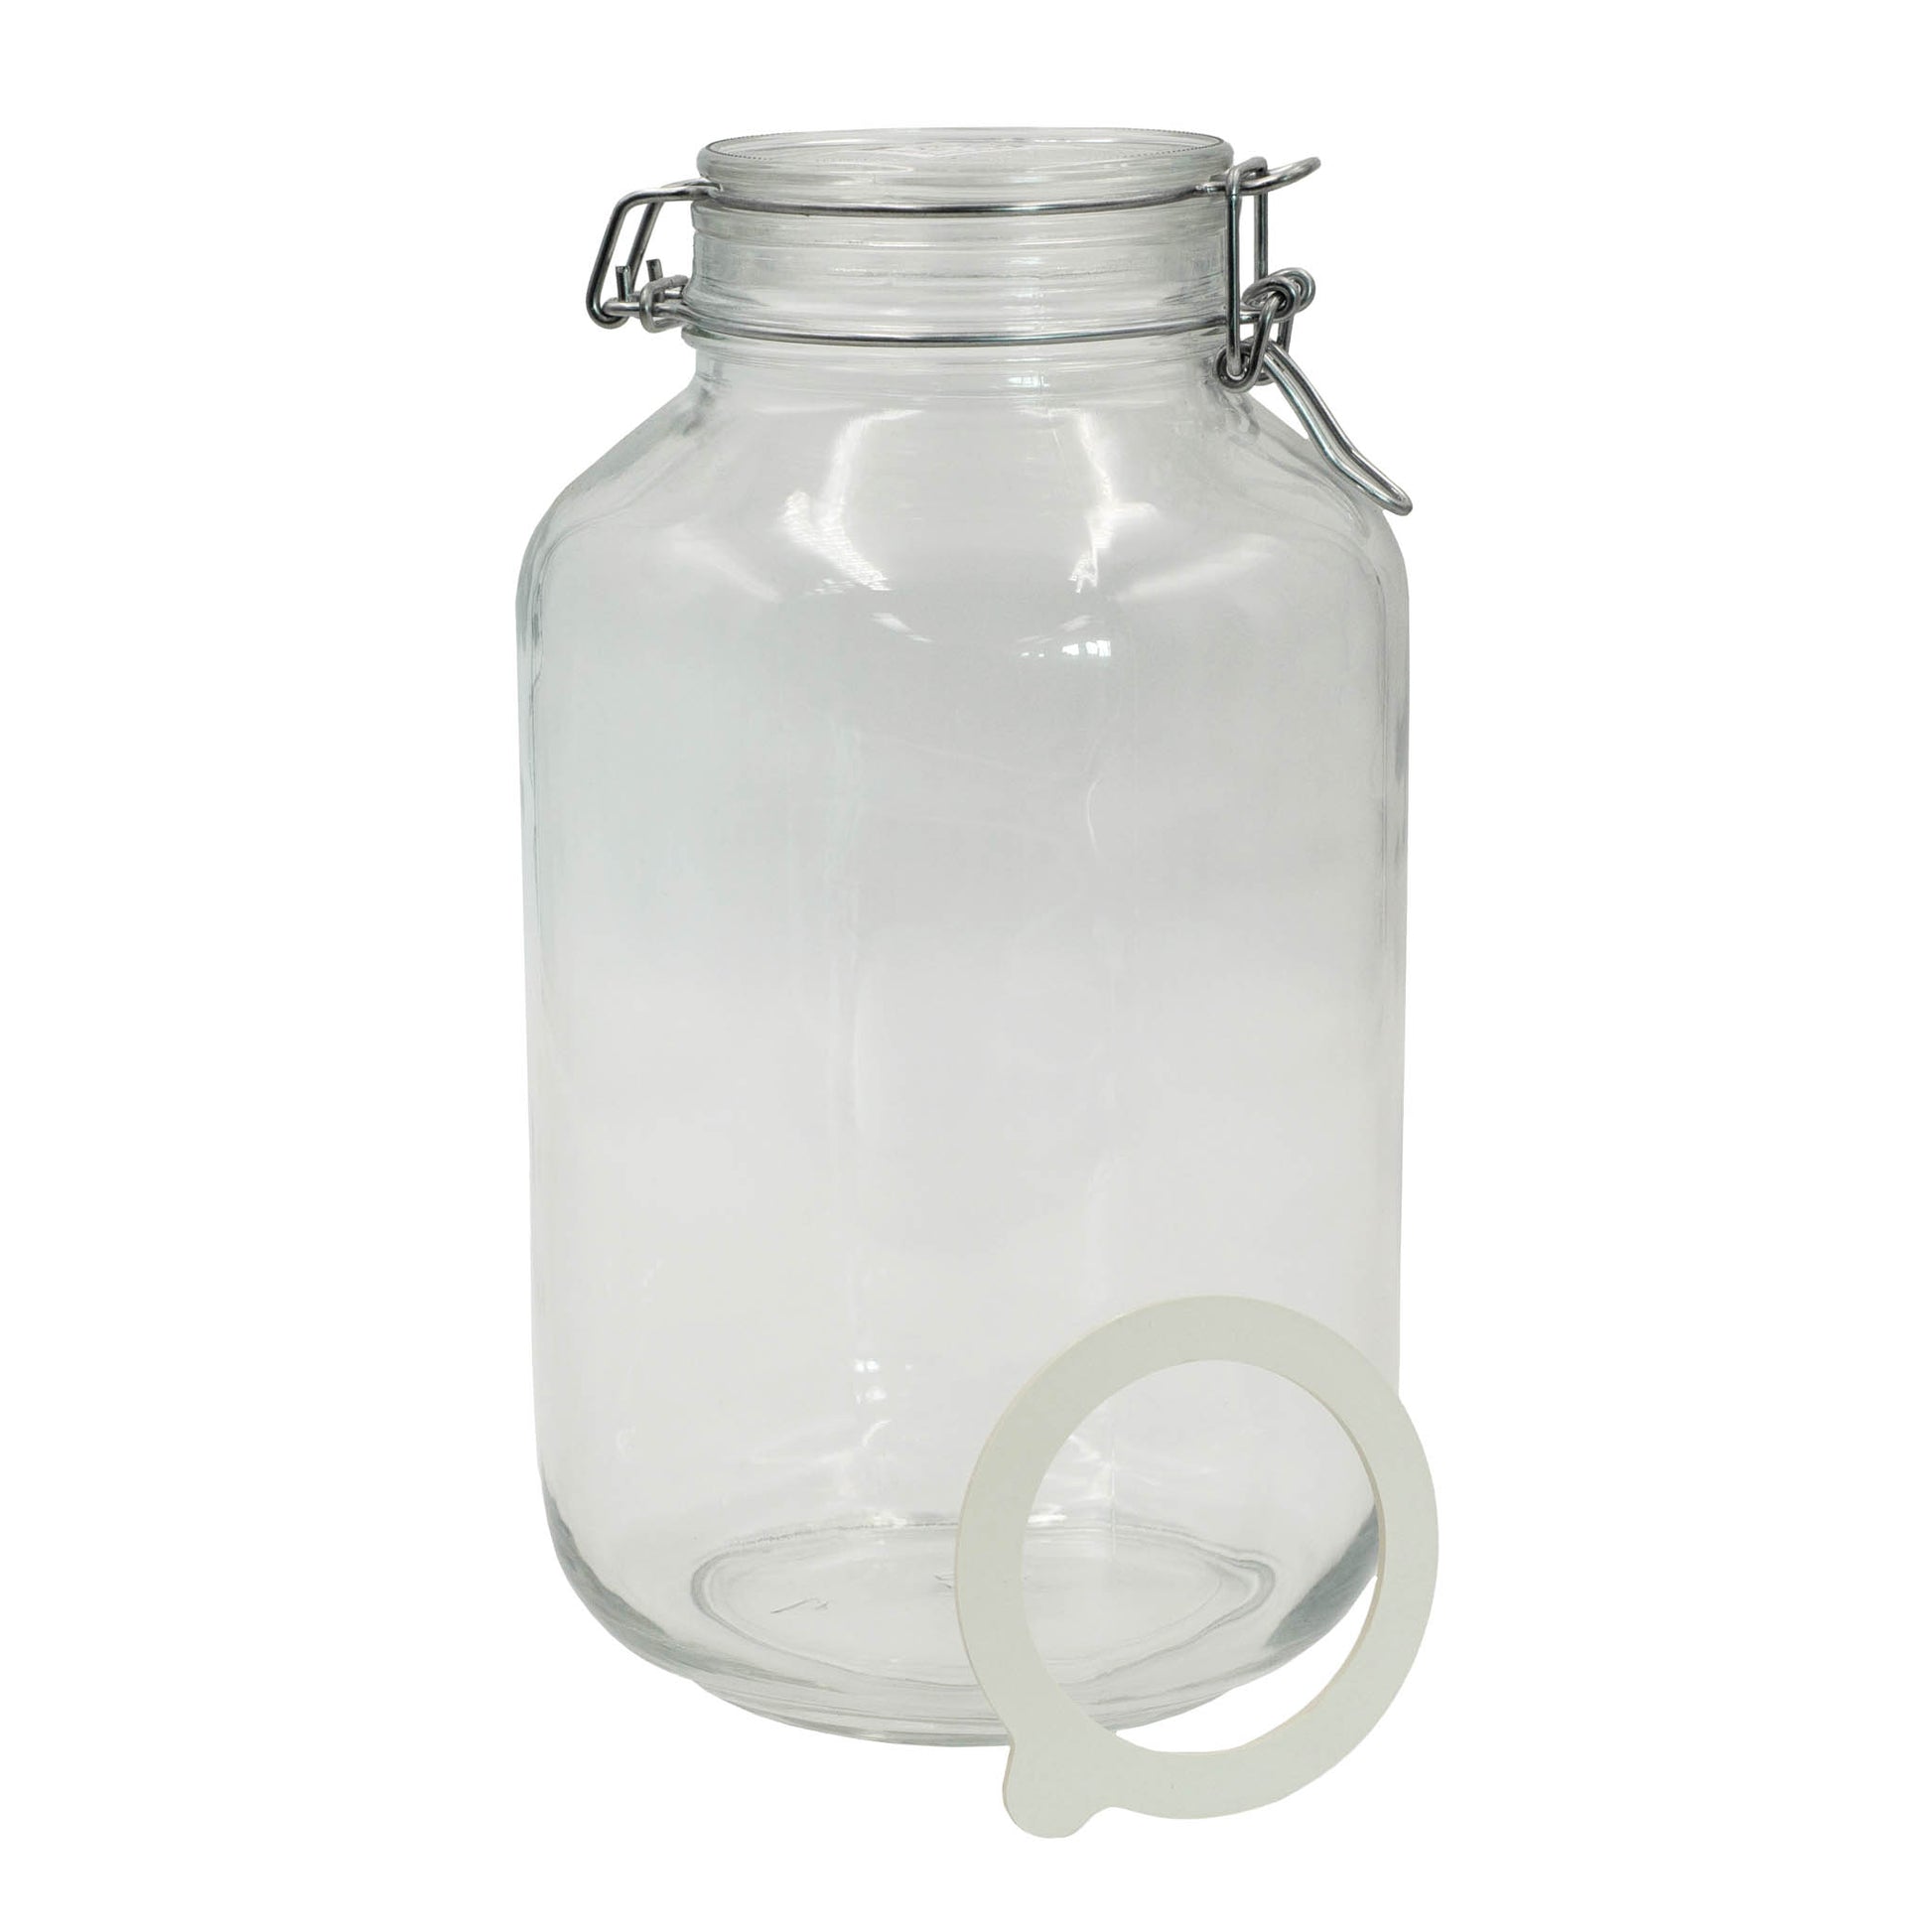 Italian made 5 litre FIDO jar with swing lid and rubber seal. For storing and fermenting oils, pickles, chutney or dry foods. 